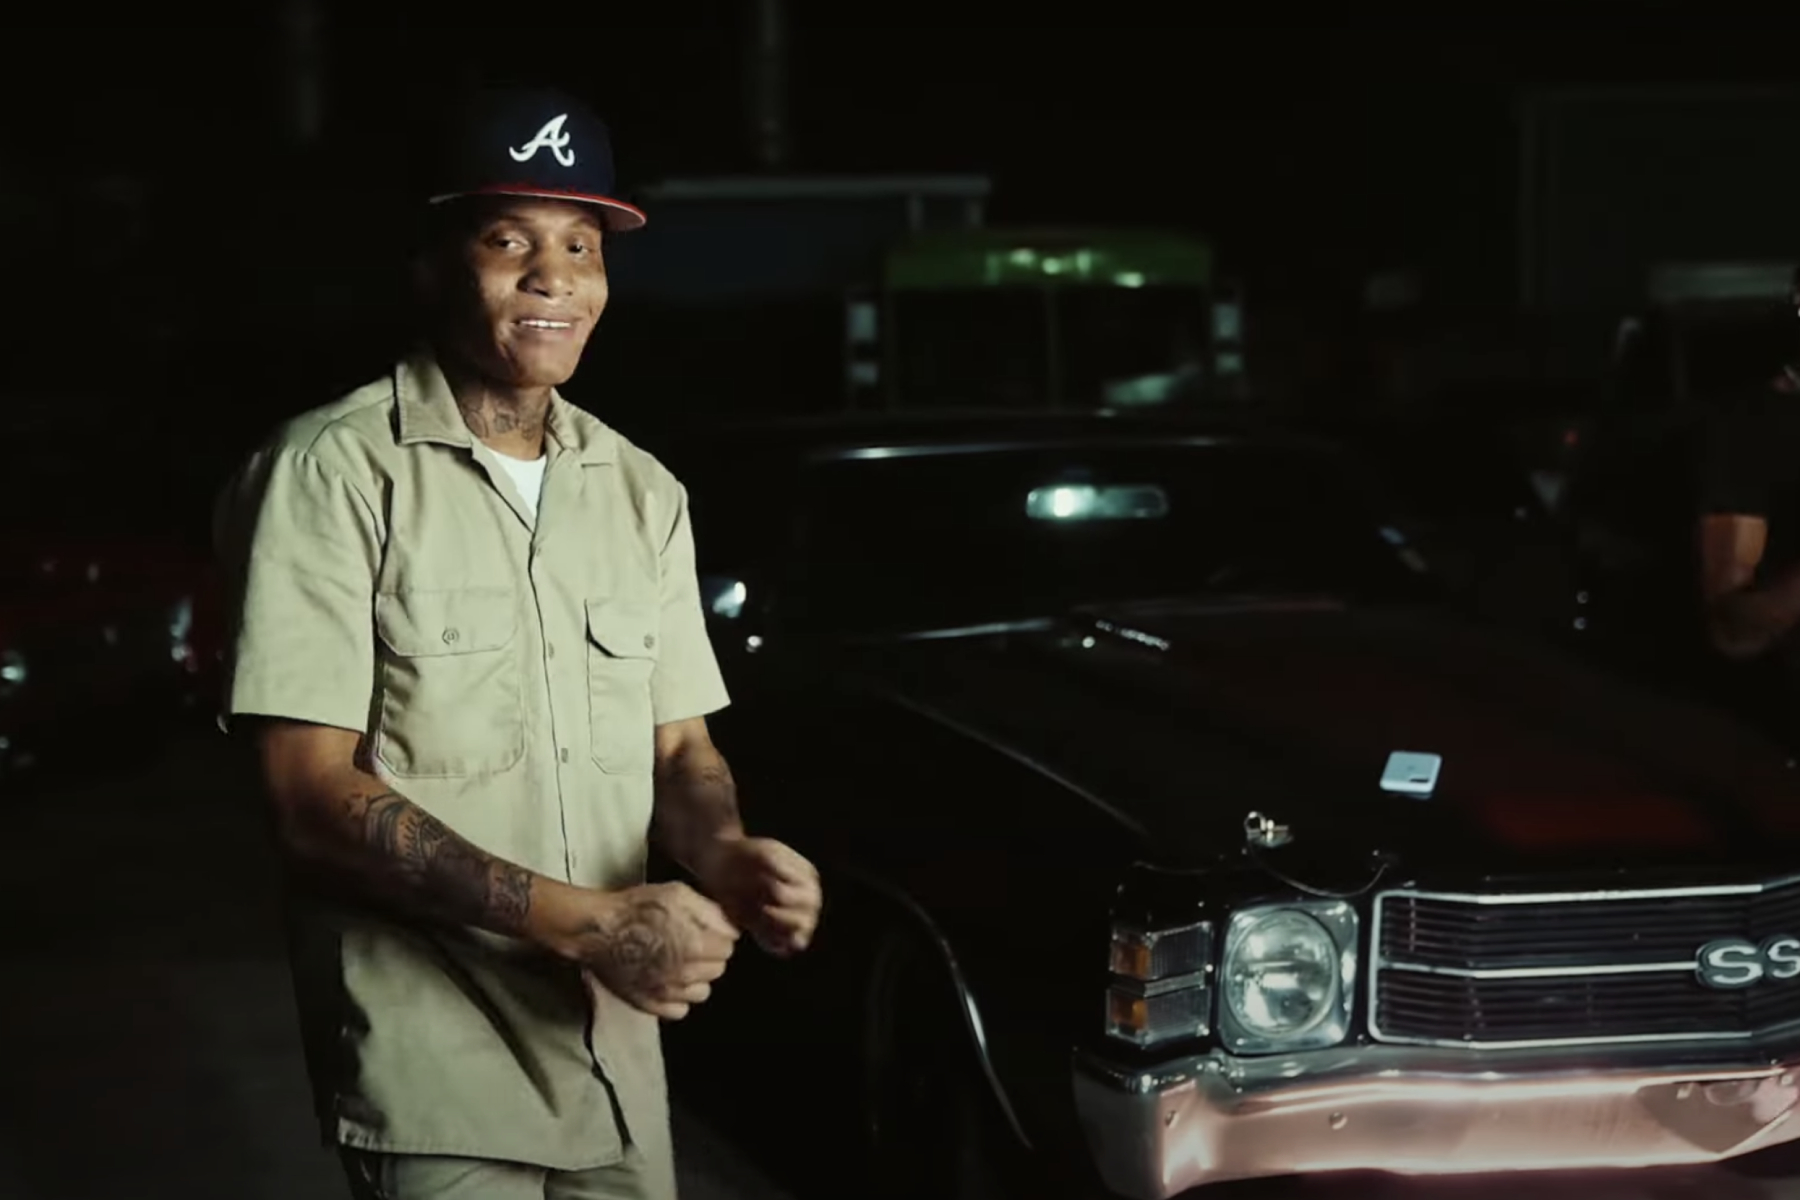 Meechy Baby pays tribute to American Classics in the ‘Cutlass’ Video